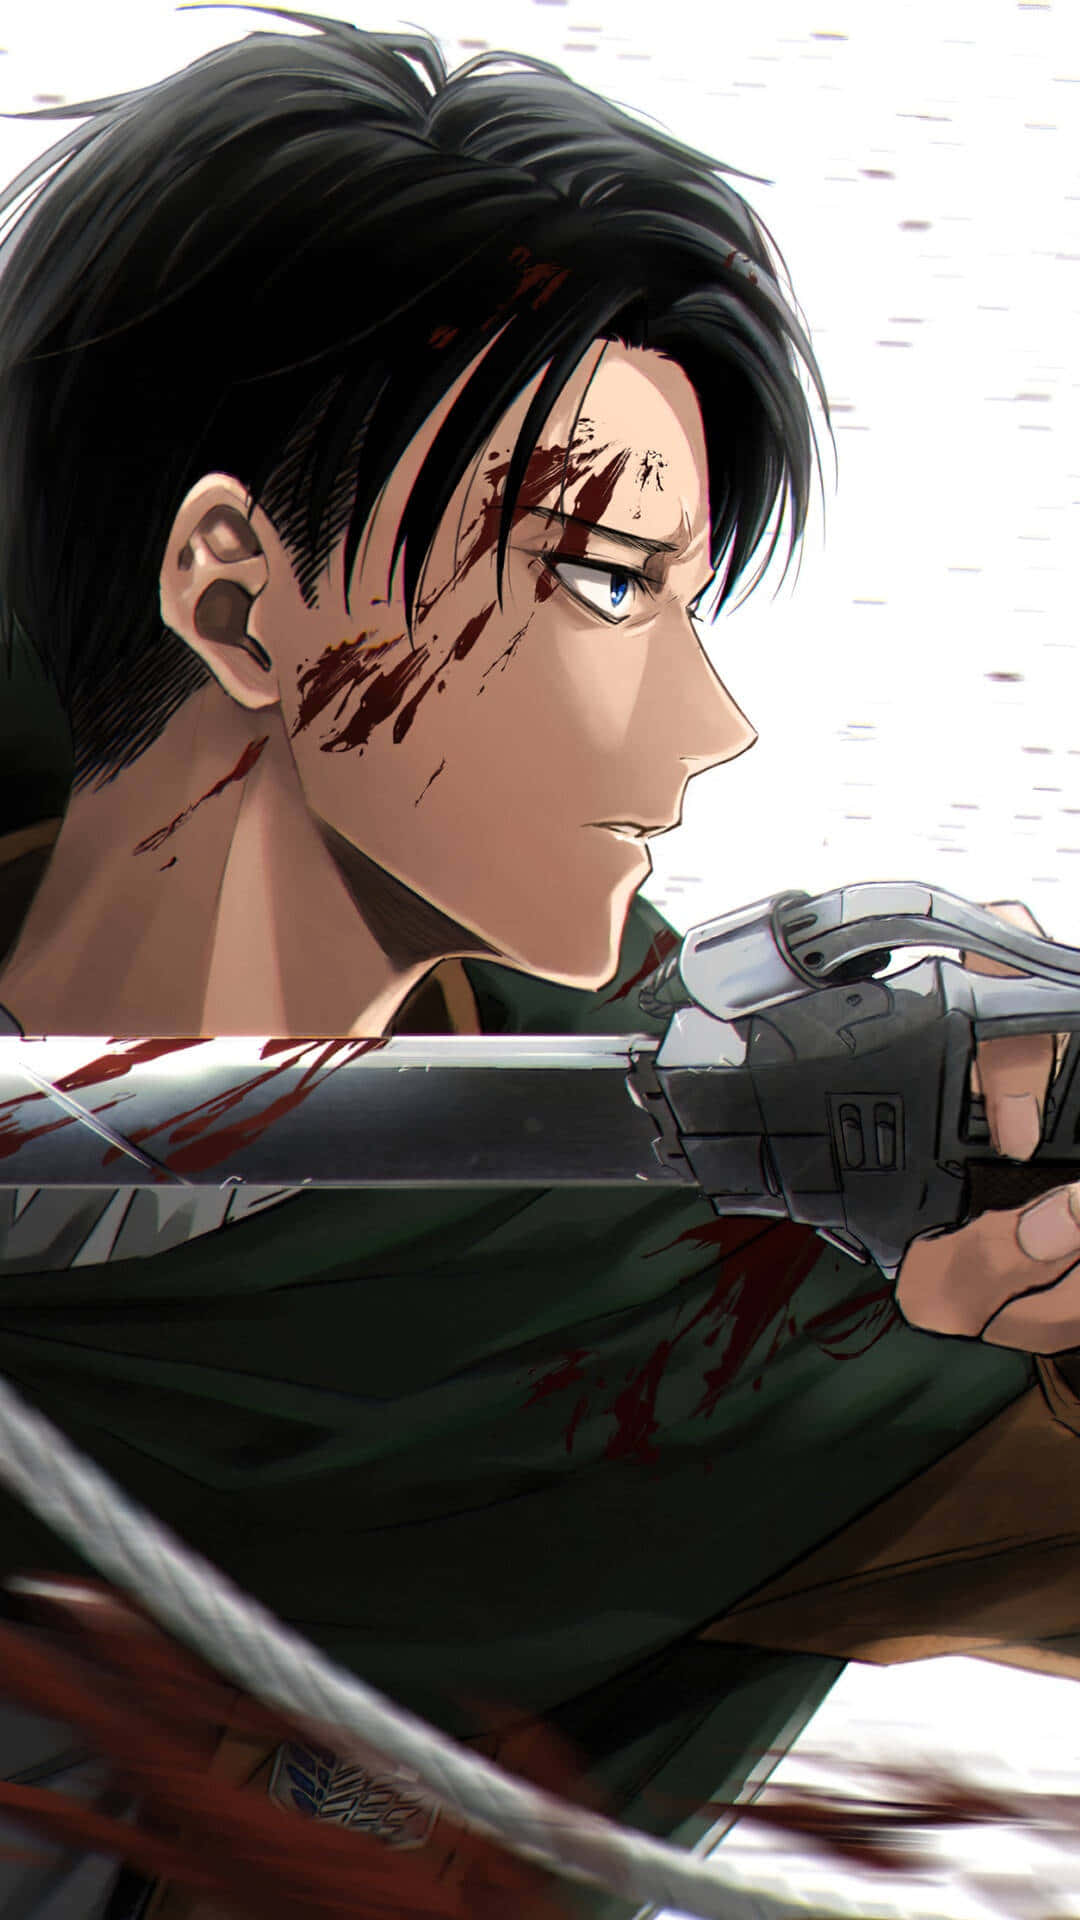 This Is An Anime Wallpaper Of A Man Background, Levi Profile Picture  Background Image And Wallpaper for Free Download